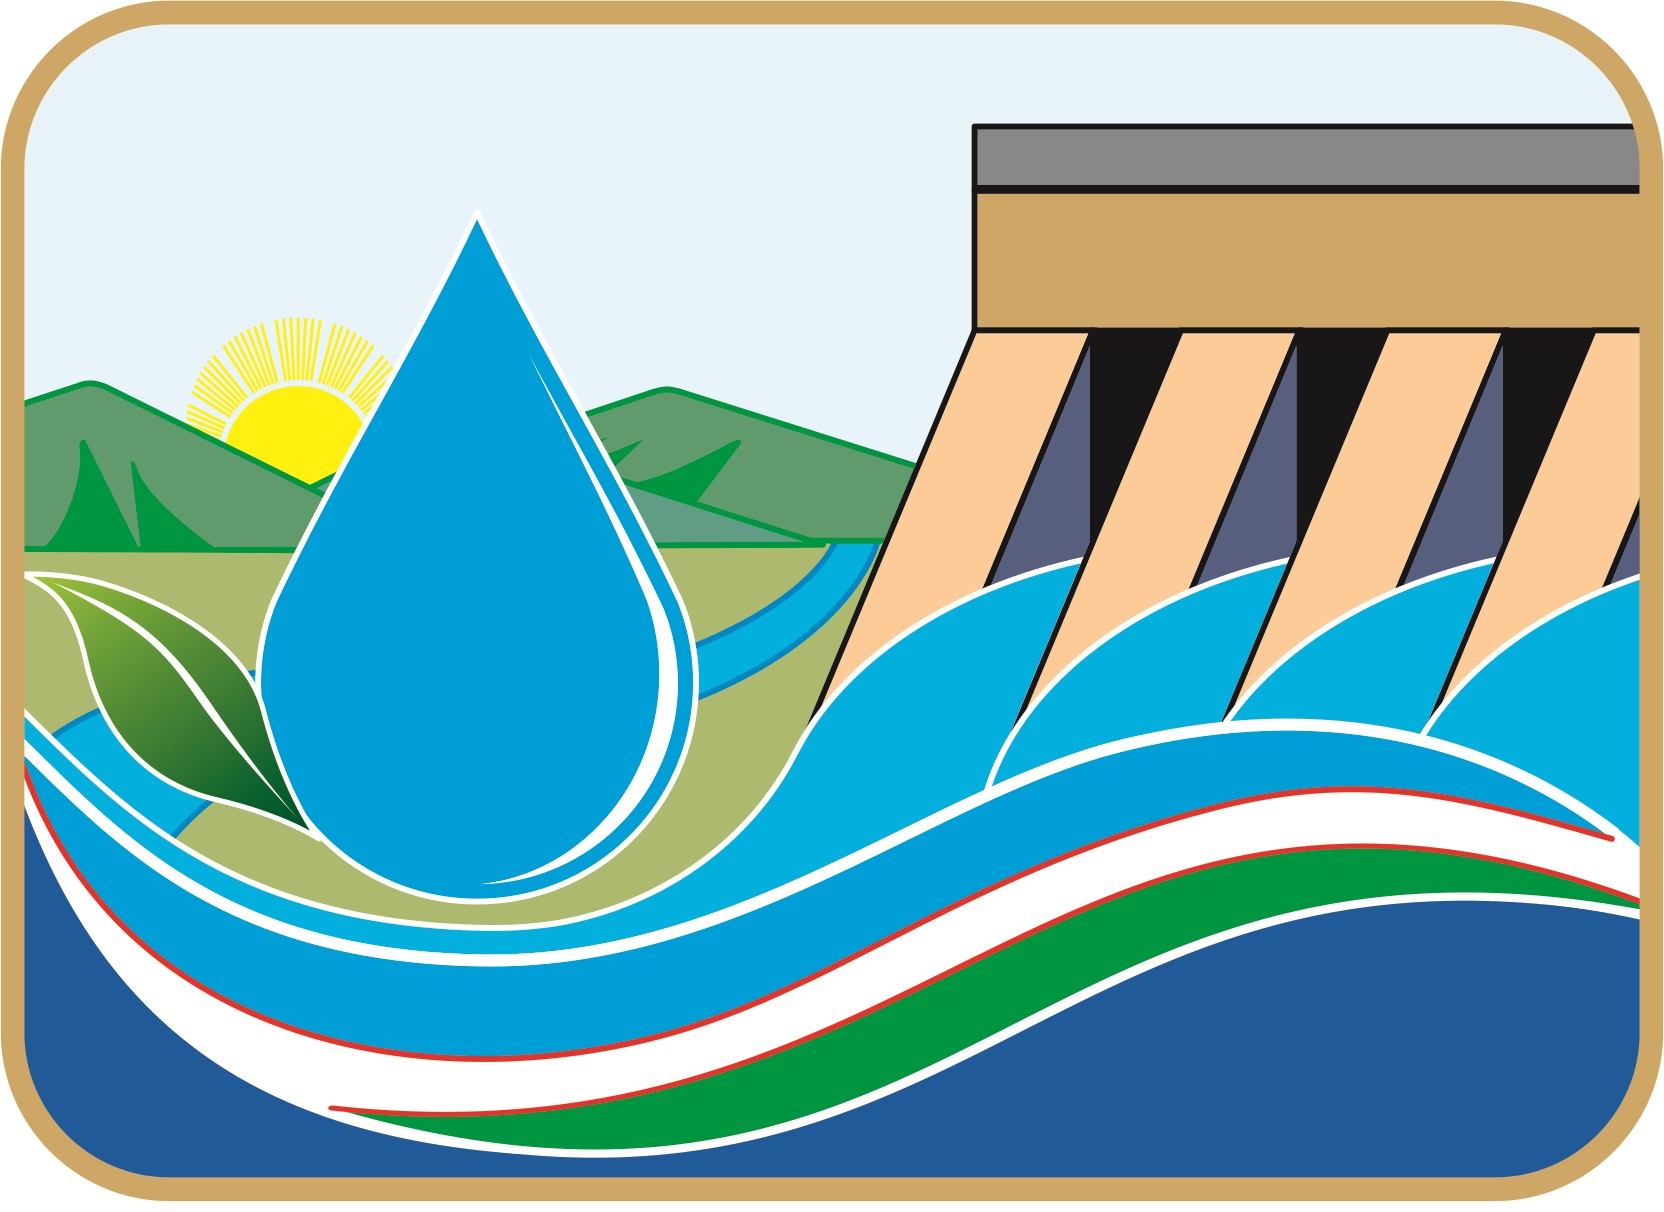 Uzbekistan: There Were Adopted Measures To Improve Water Management In The Republic Of Uzbekistan